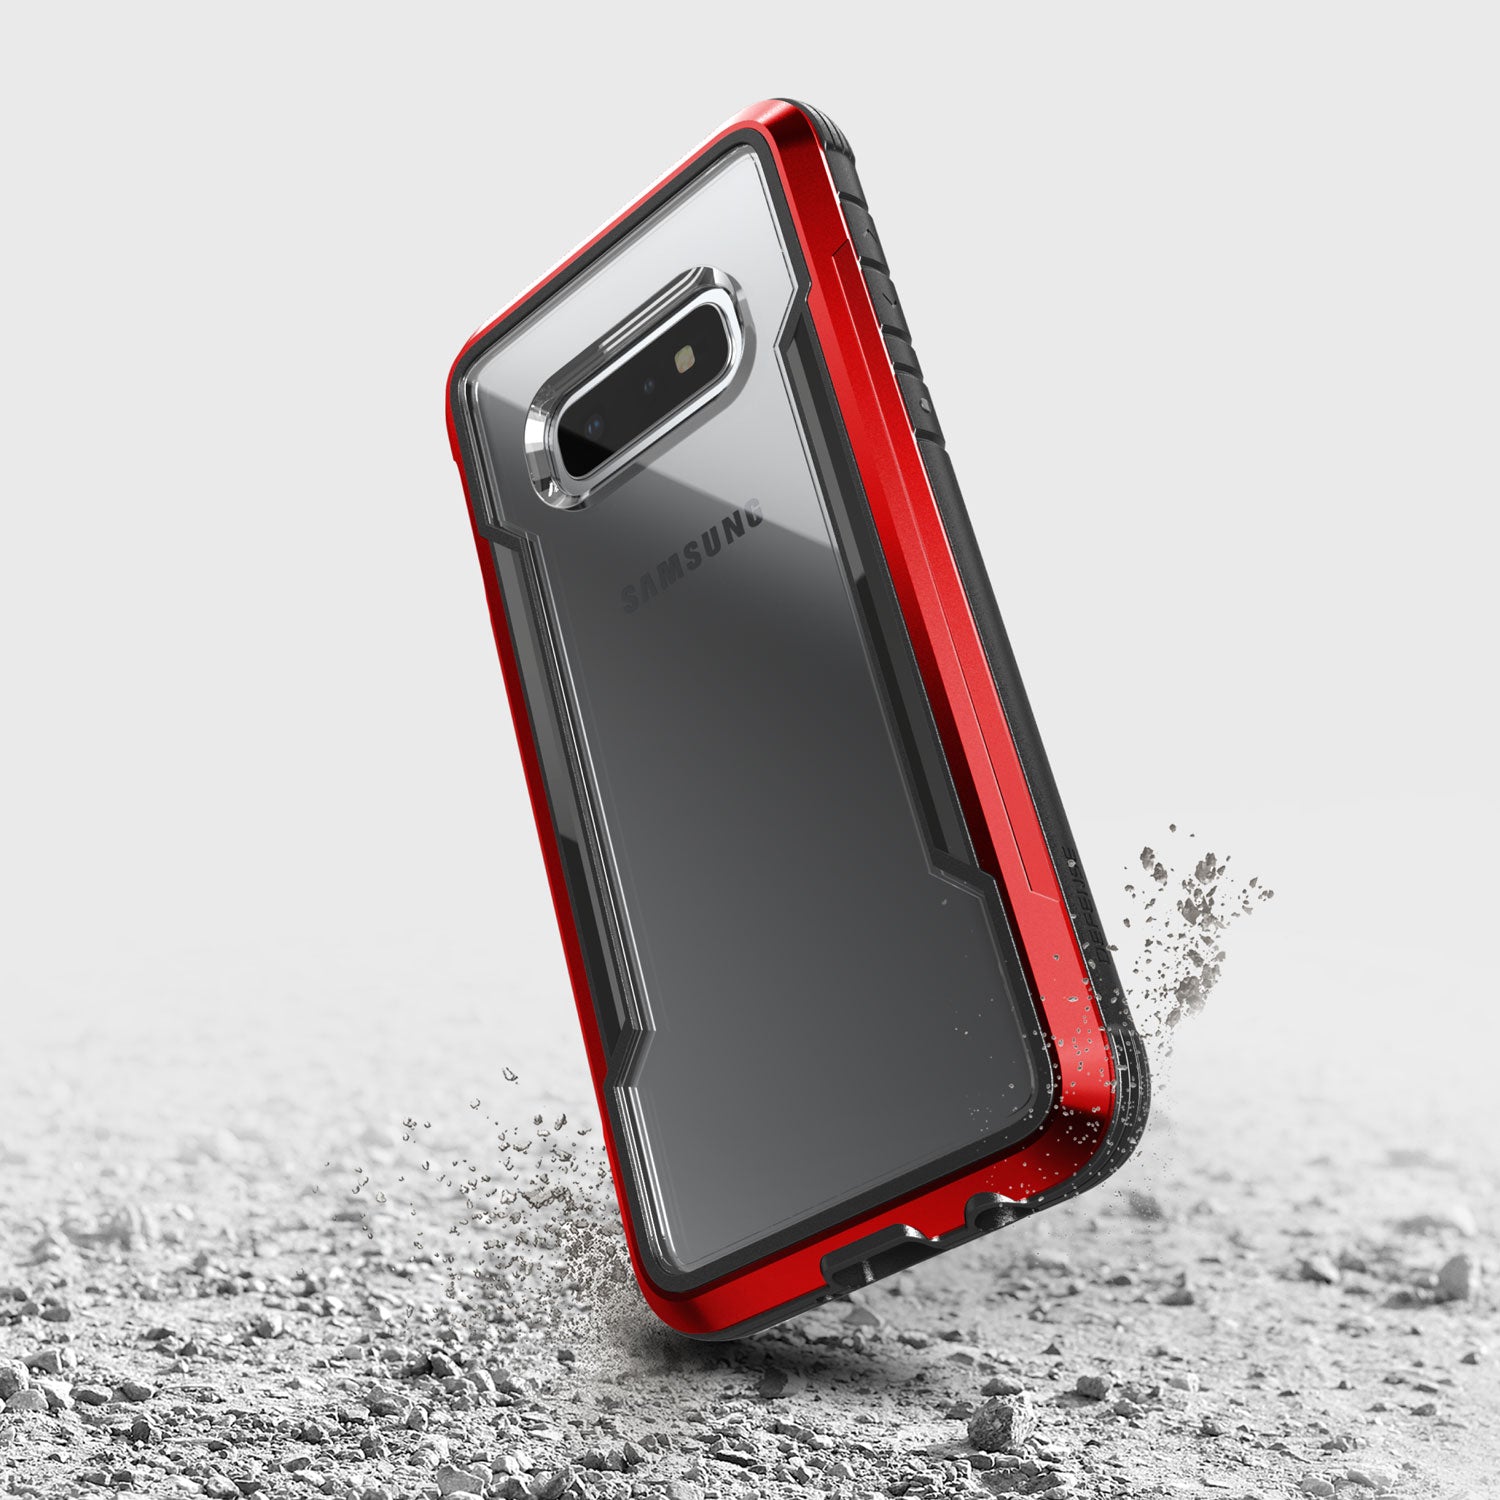 The X-Doria Samsung Galaxy S10e Case Raptic Shield Red in red and black offers drop protection.